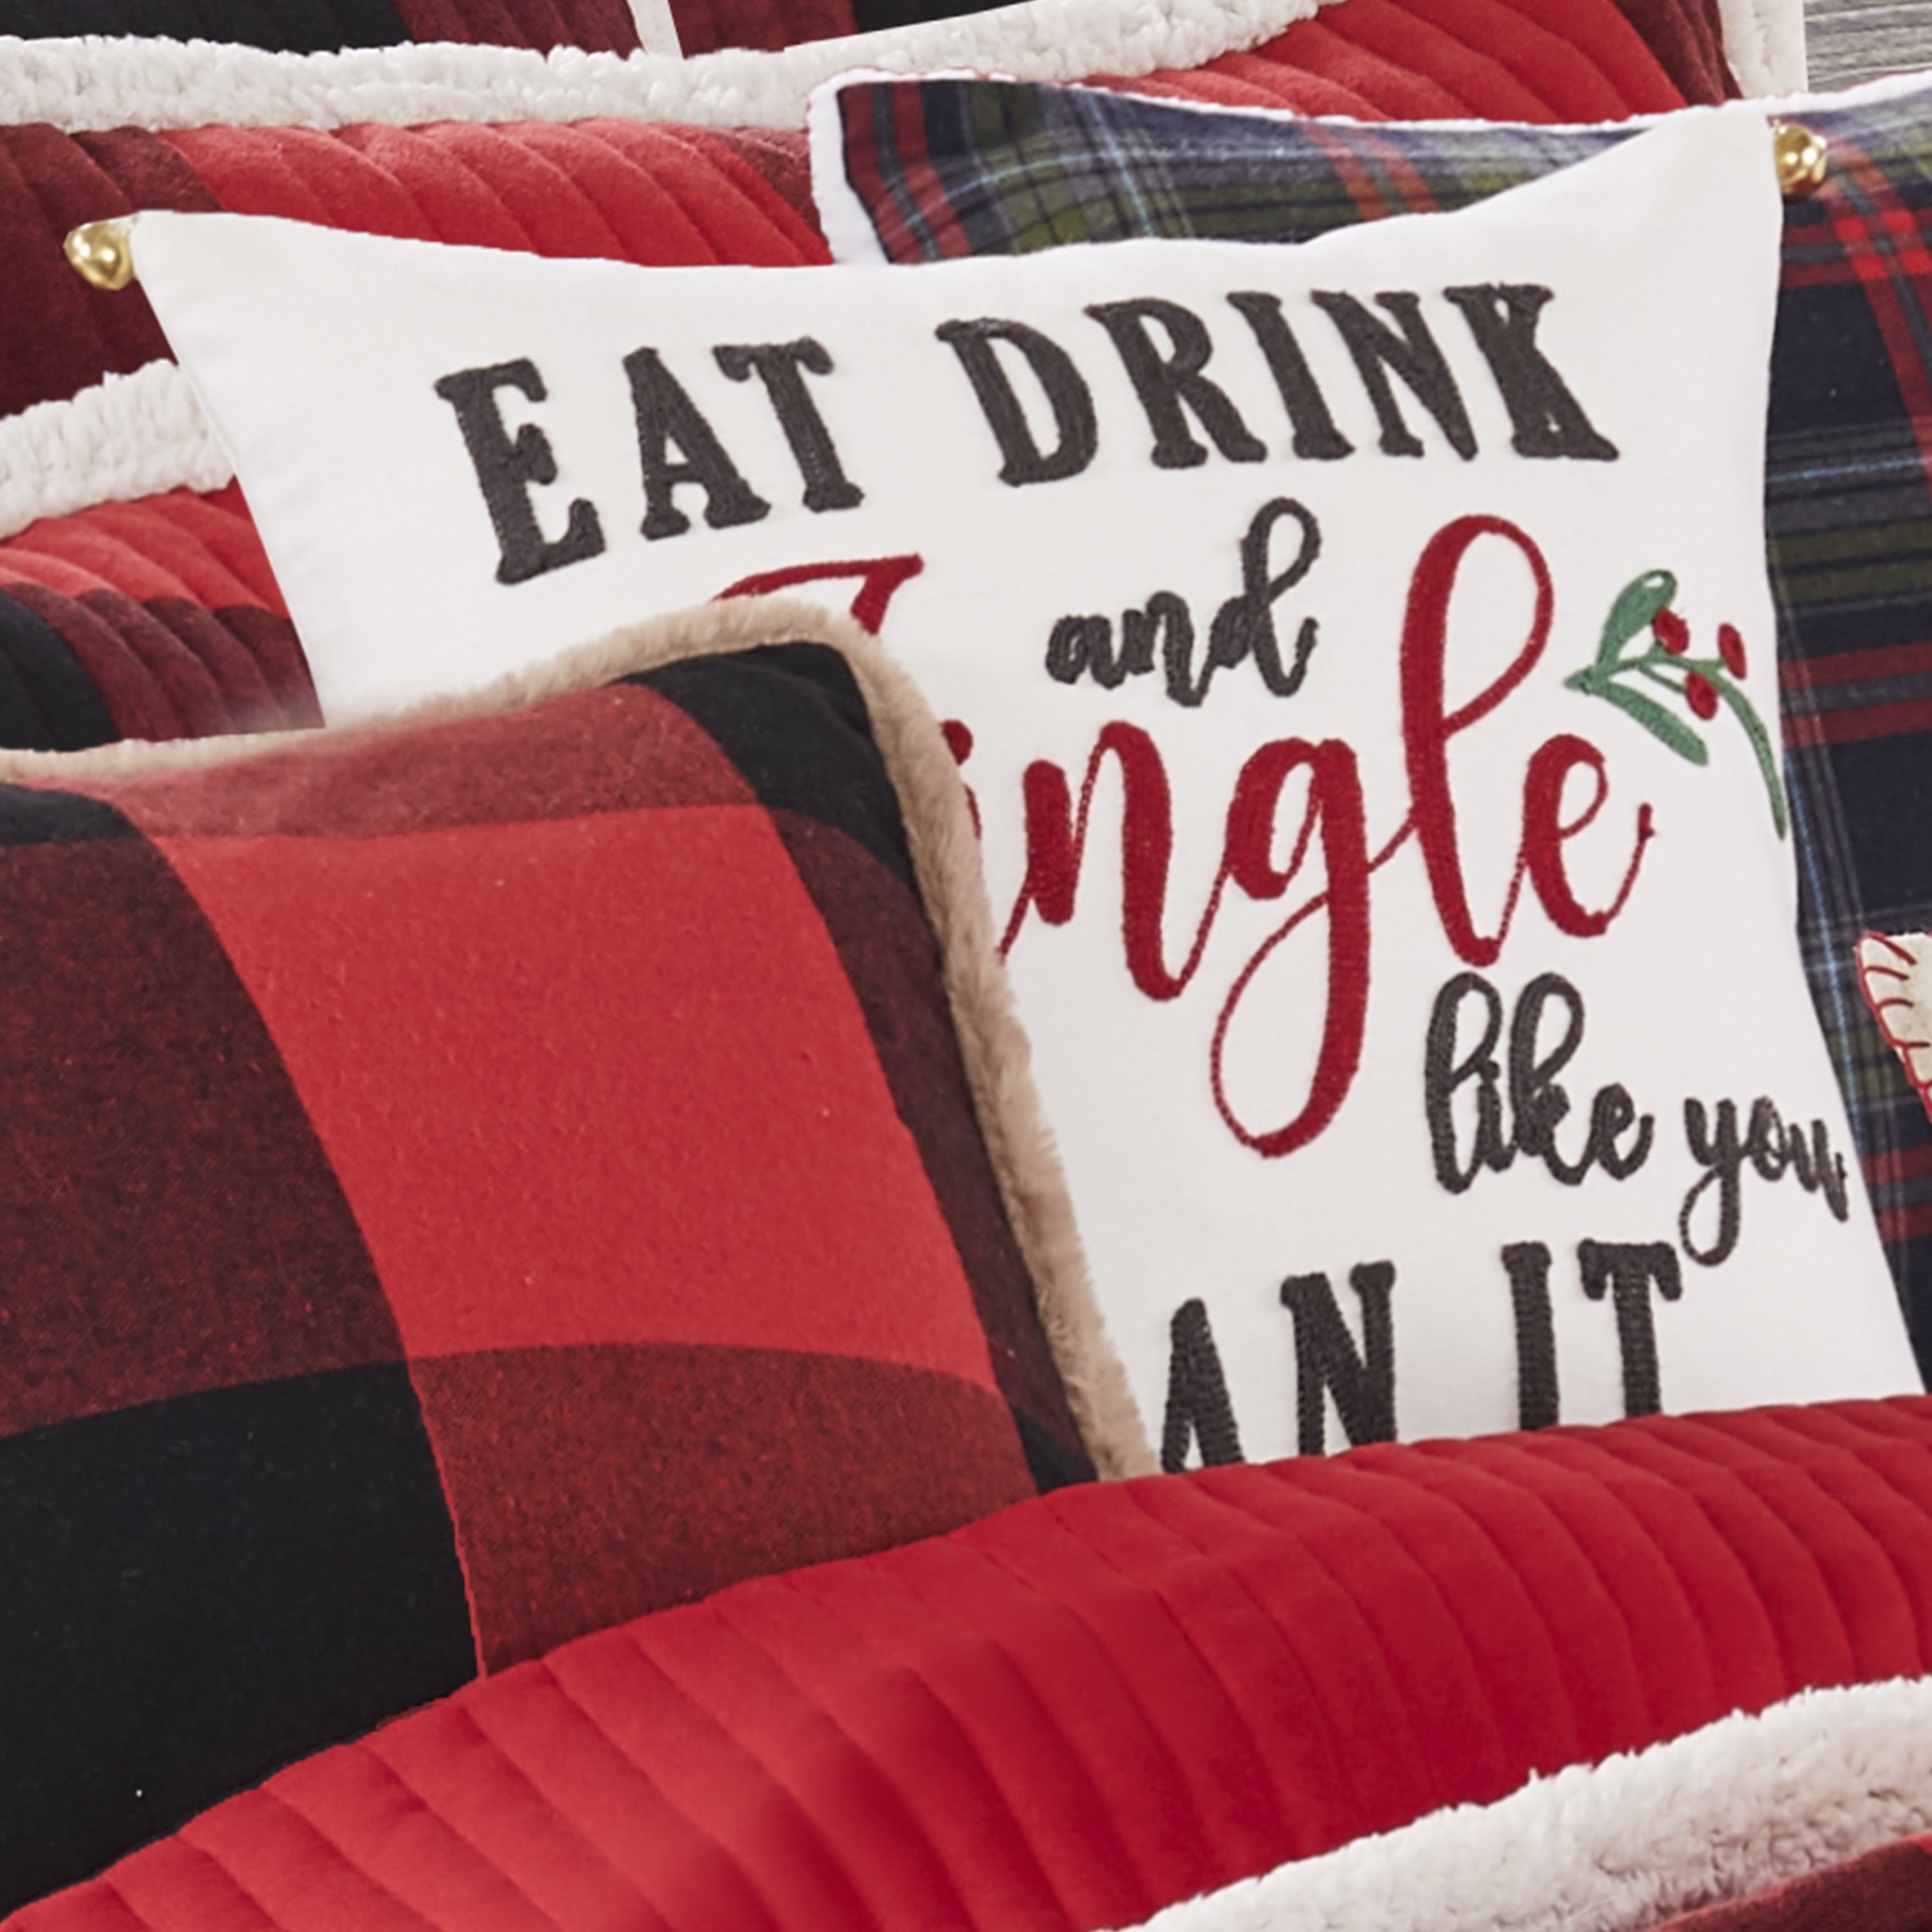 Details about   The Wearable Traditional Throw Blanket Monogrammed "A" Red/Black Plaid 